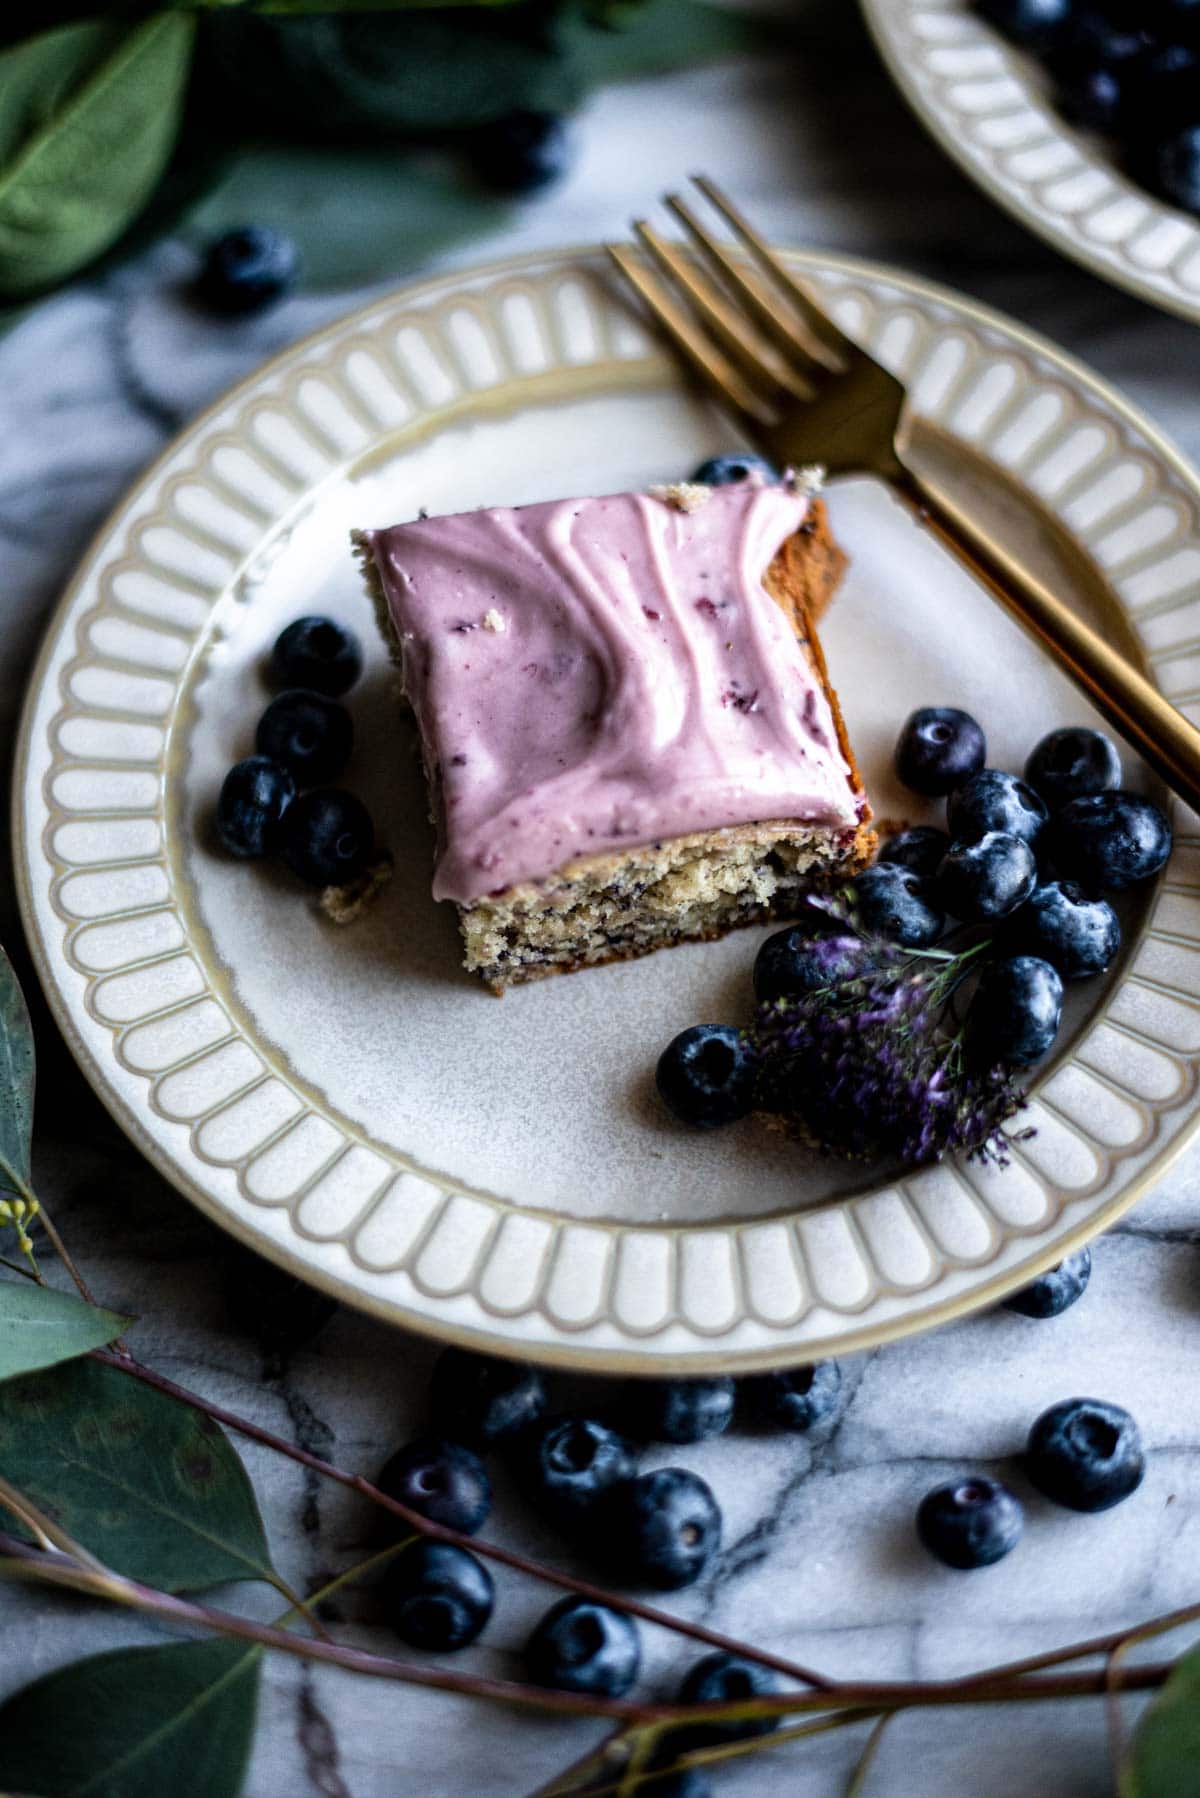 Slice of blueberry sheet cake on a plate with blueberries.